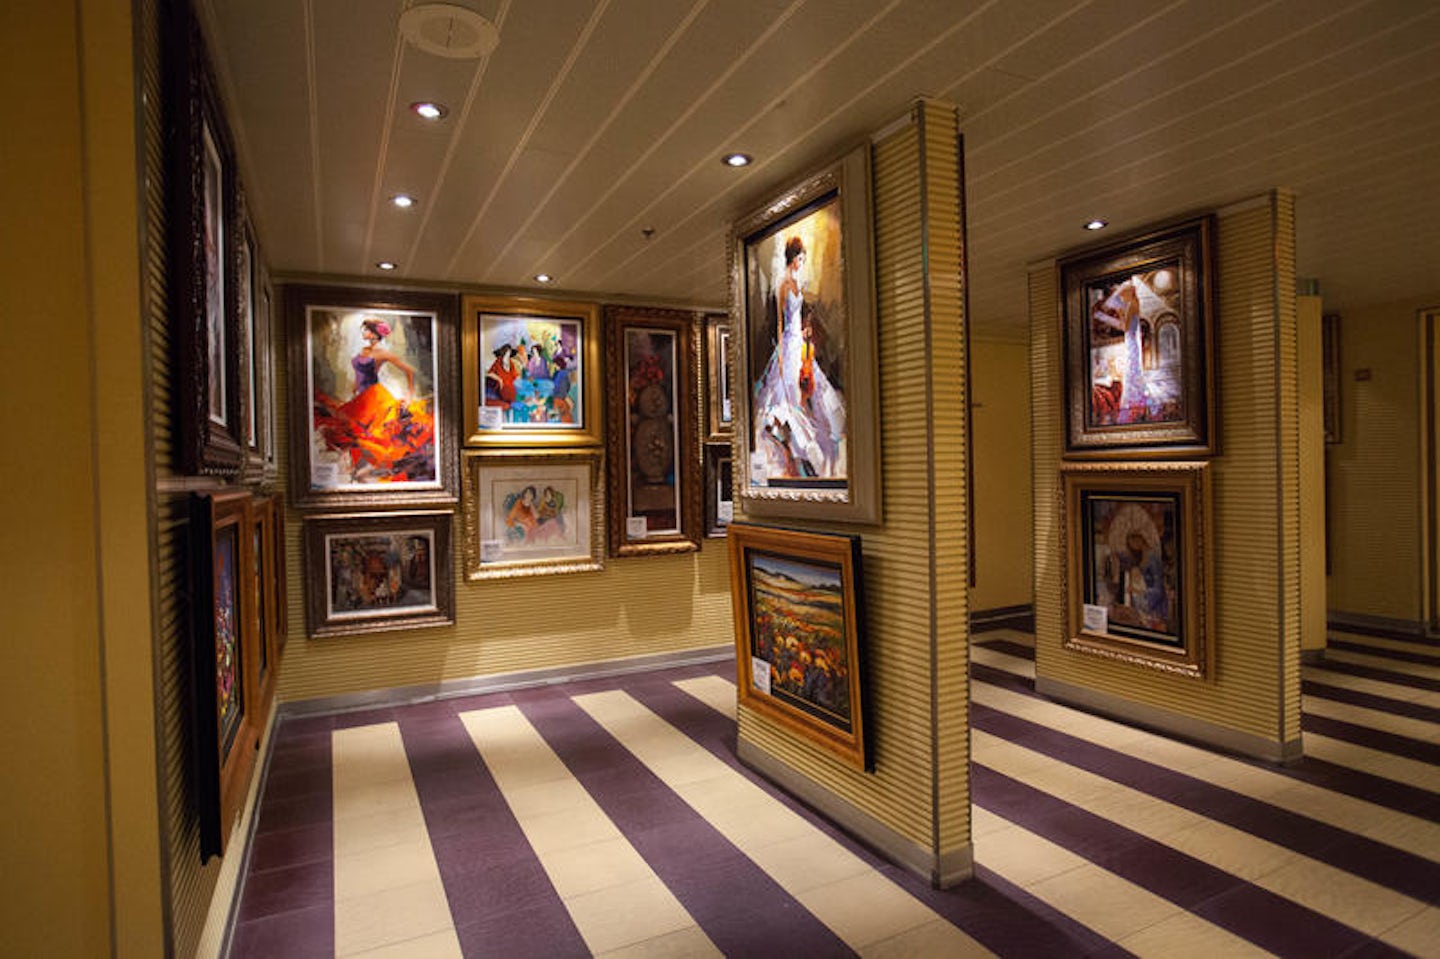 Gallery on the Way on Carnival Breeze